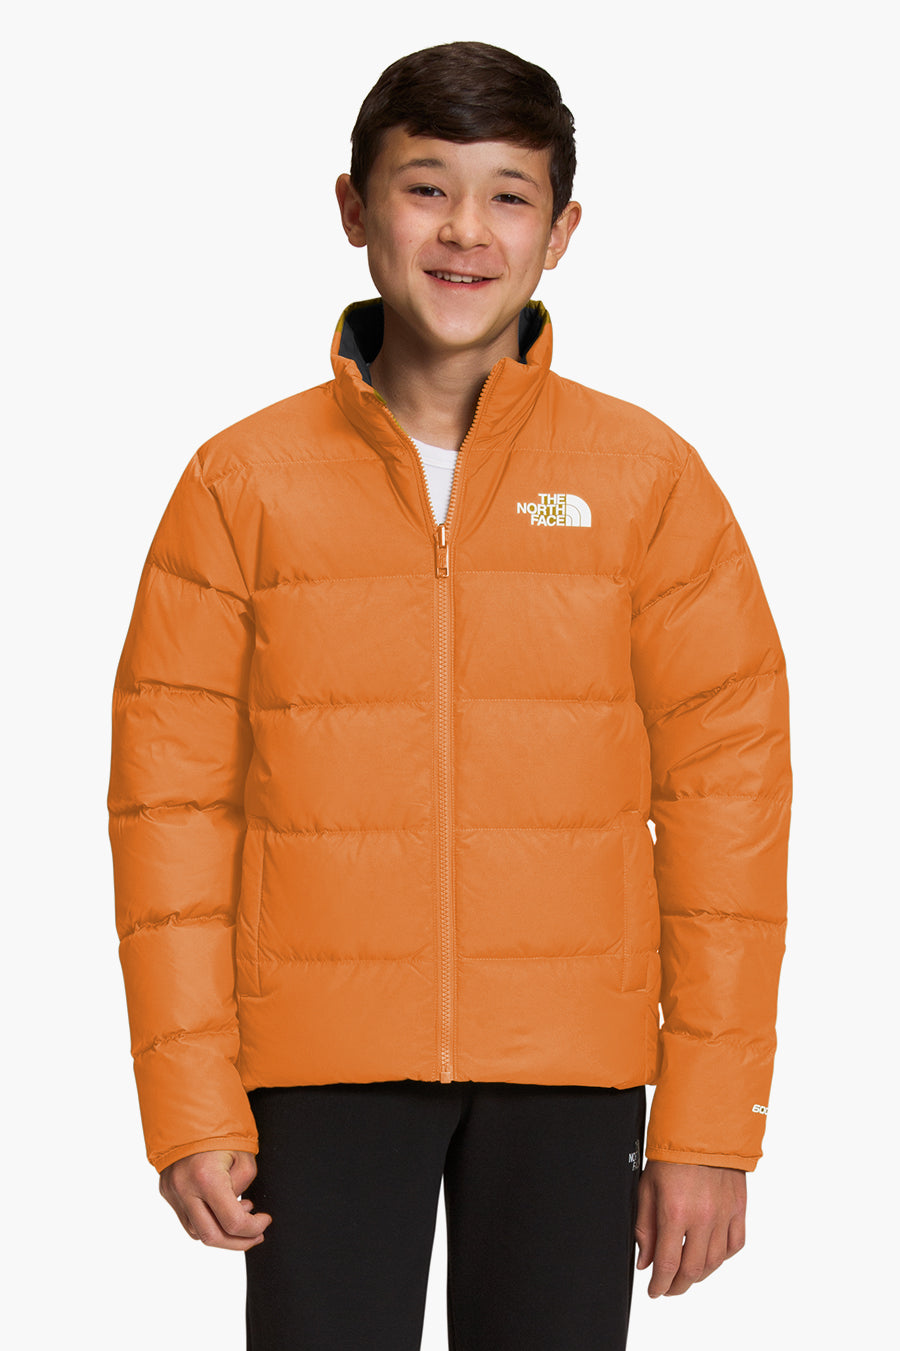 Kids Jacket North Face Reversible North Down Cone Orange (Size 12 left)